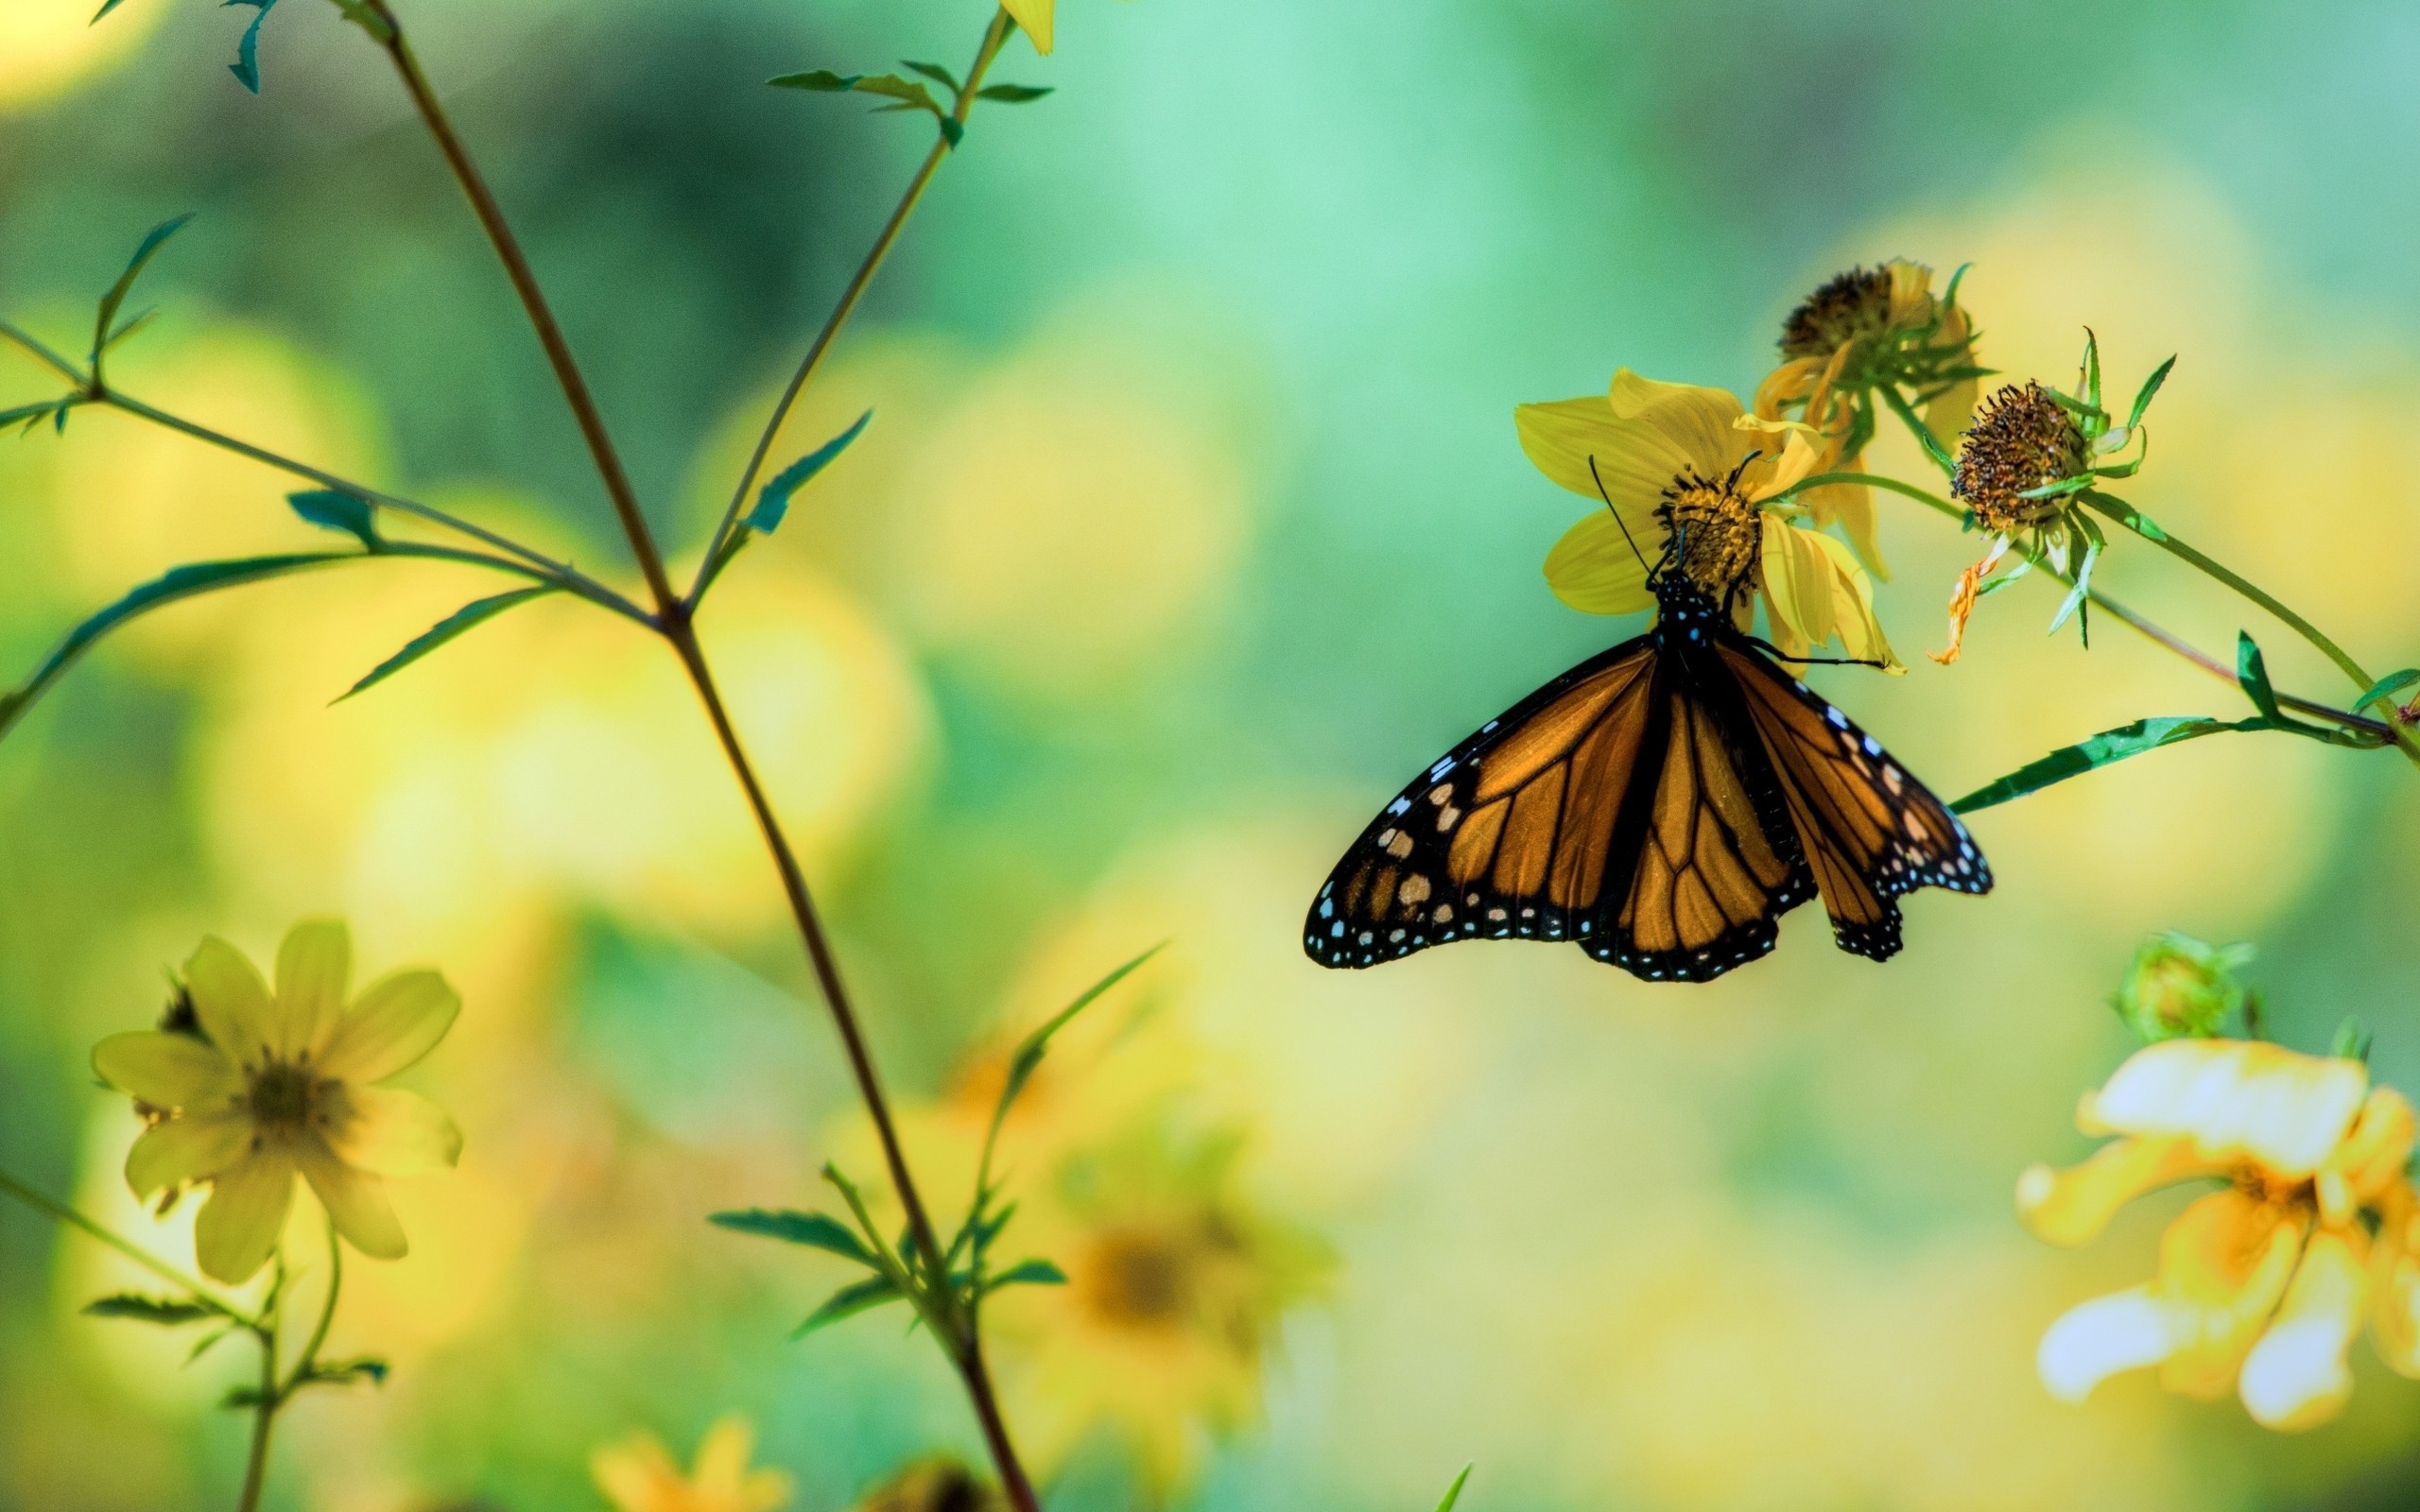 Wallpaper.wiki Beautiful Butterfly Perched on Flower Background